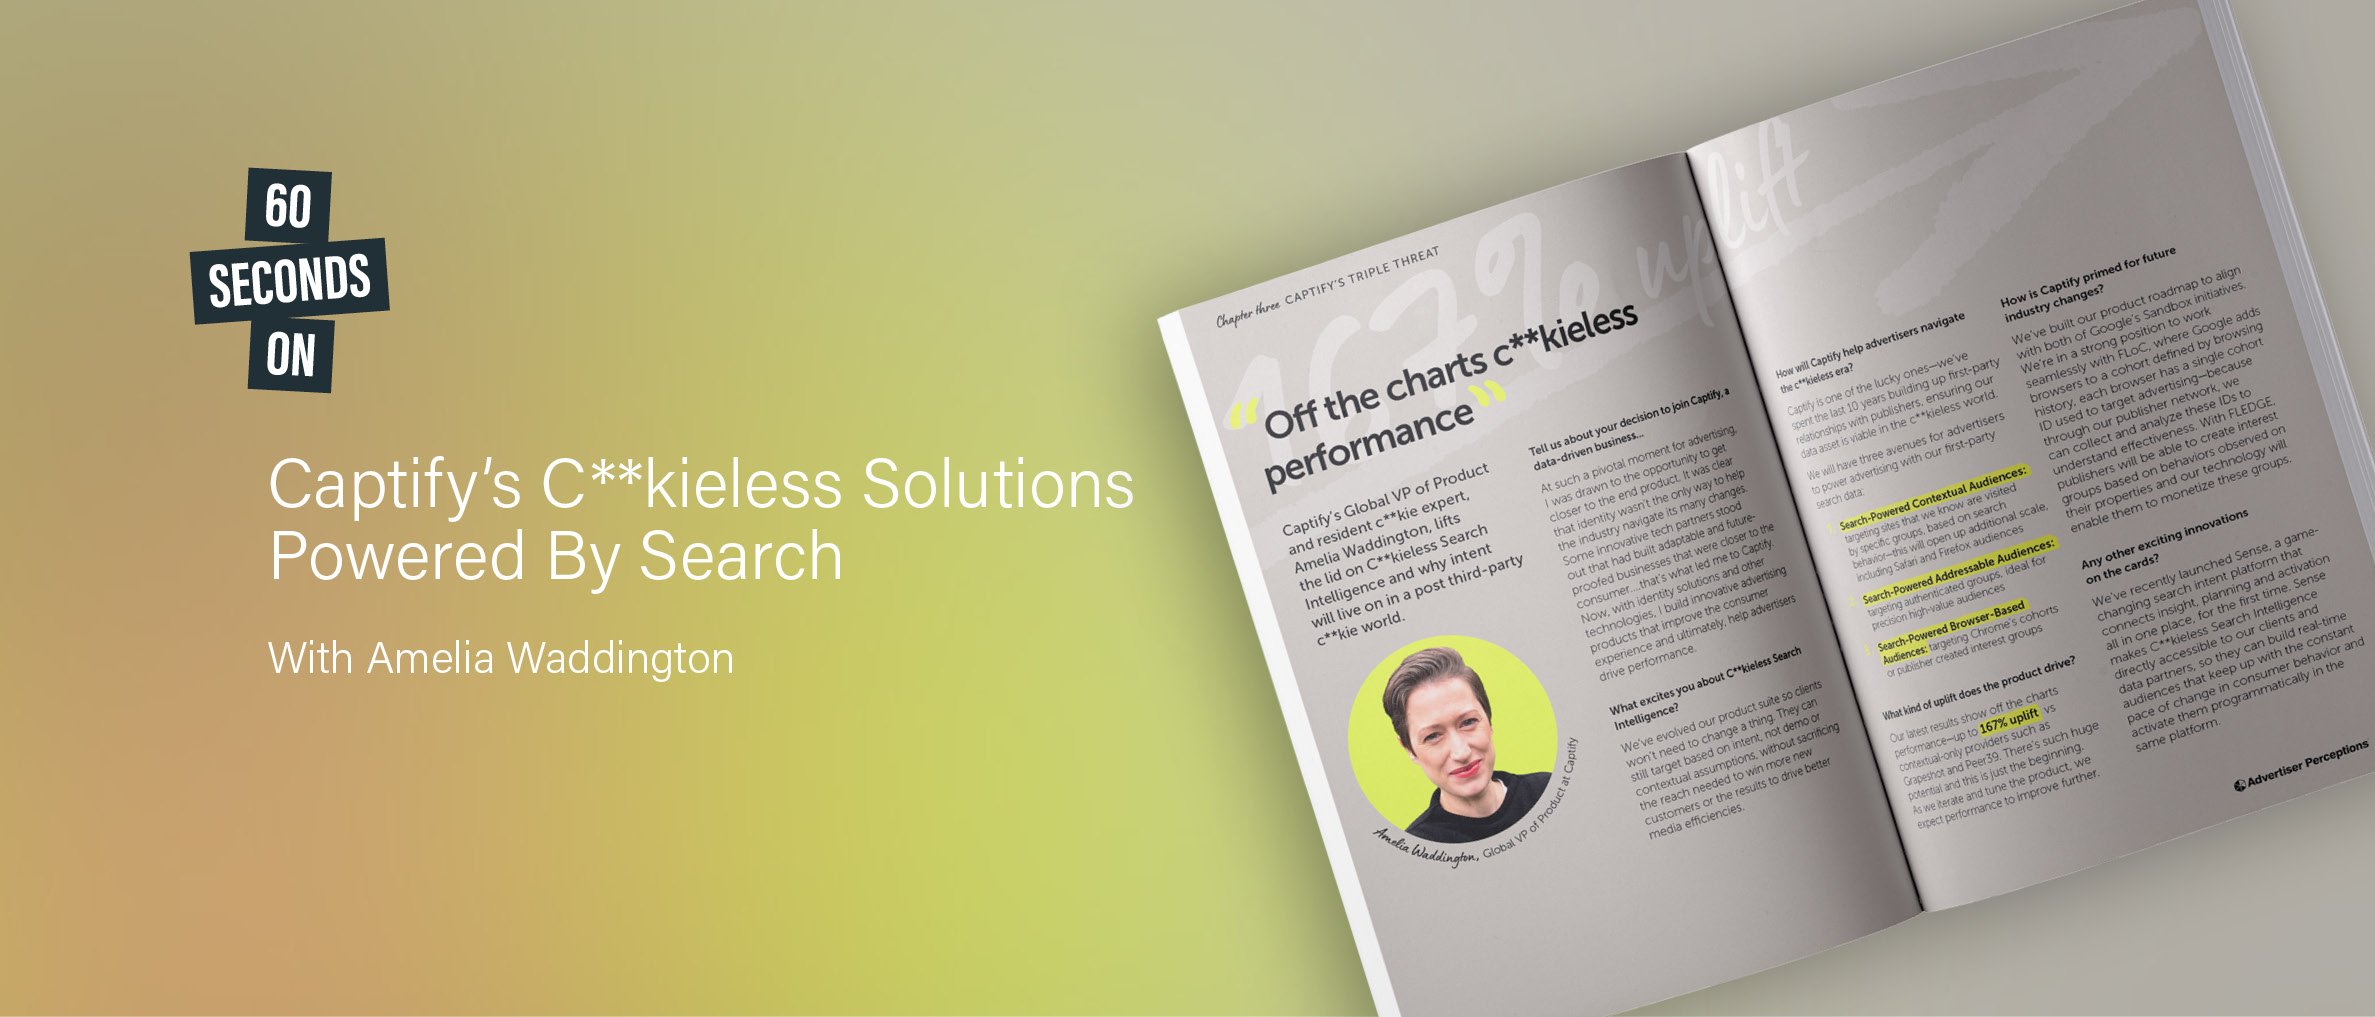 60 Seconds On: Captify’s C**kieless Solutions Powered By Search—With Amelia Waddington